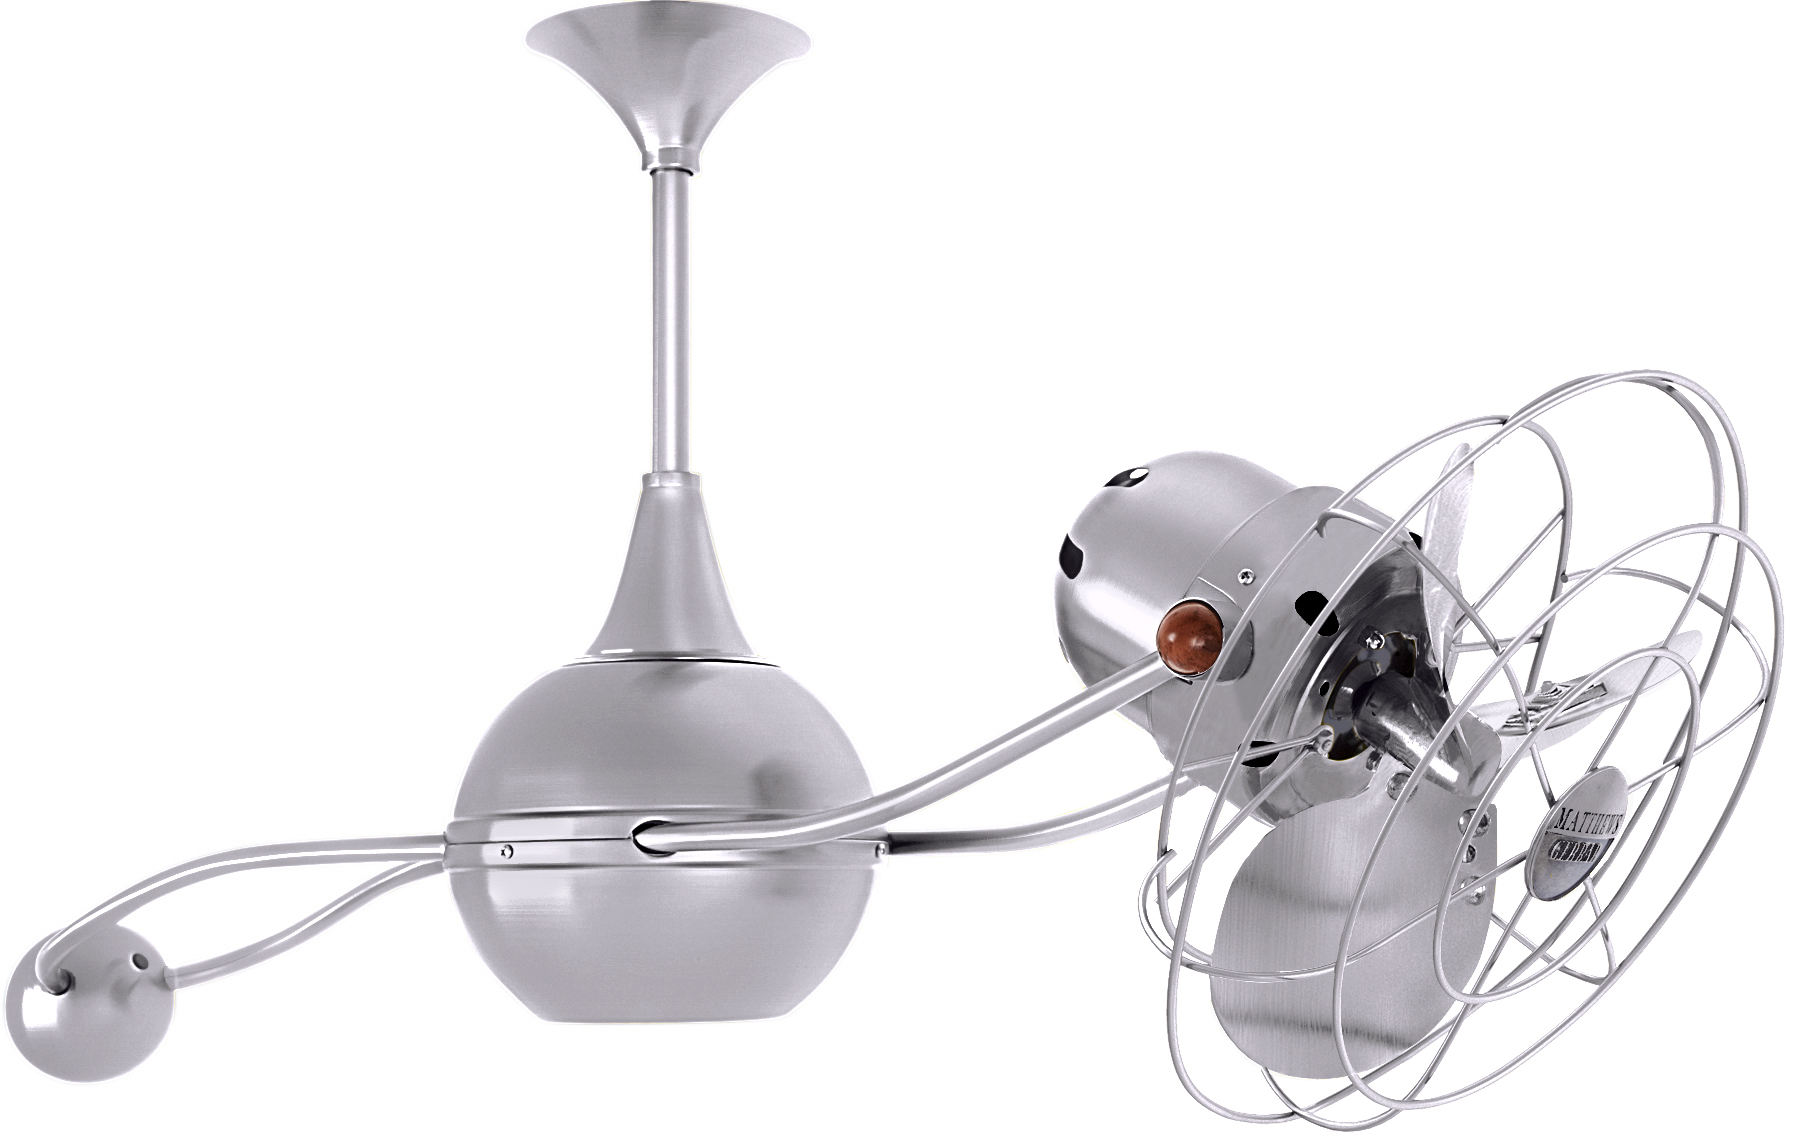 Brisa 2000 ceiling fan in brushed nickel finish with metal blades in decorative cage made by Matthews Fan Company.